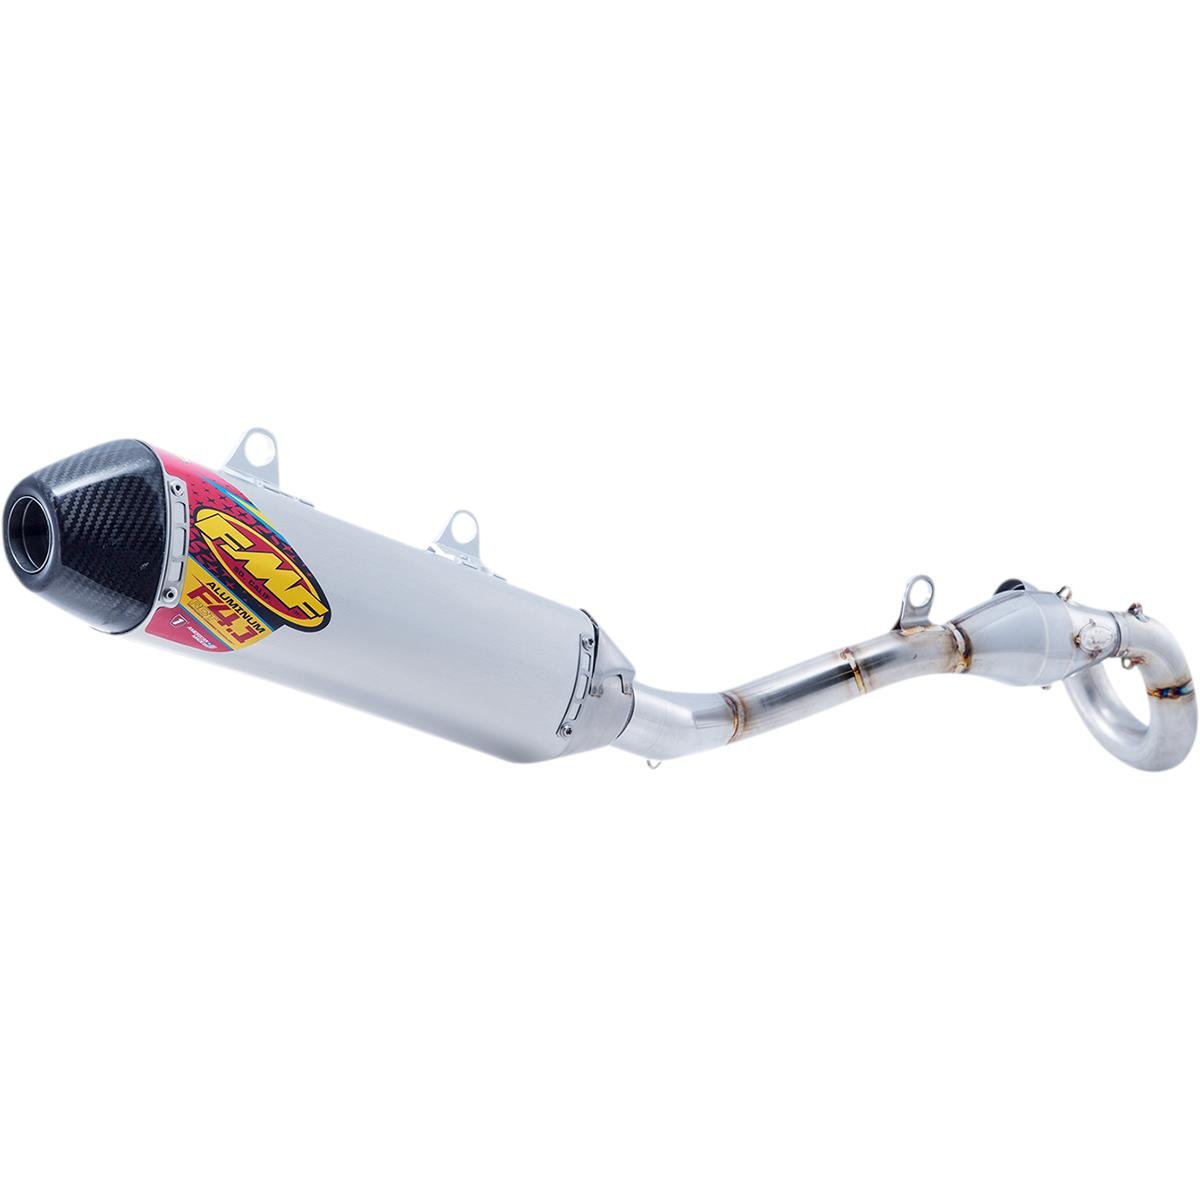 FMF Scarico completo 4.1 RCT Stainless Kawasaki KX 250F 21-